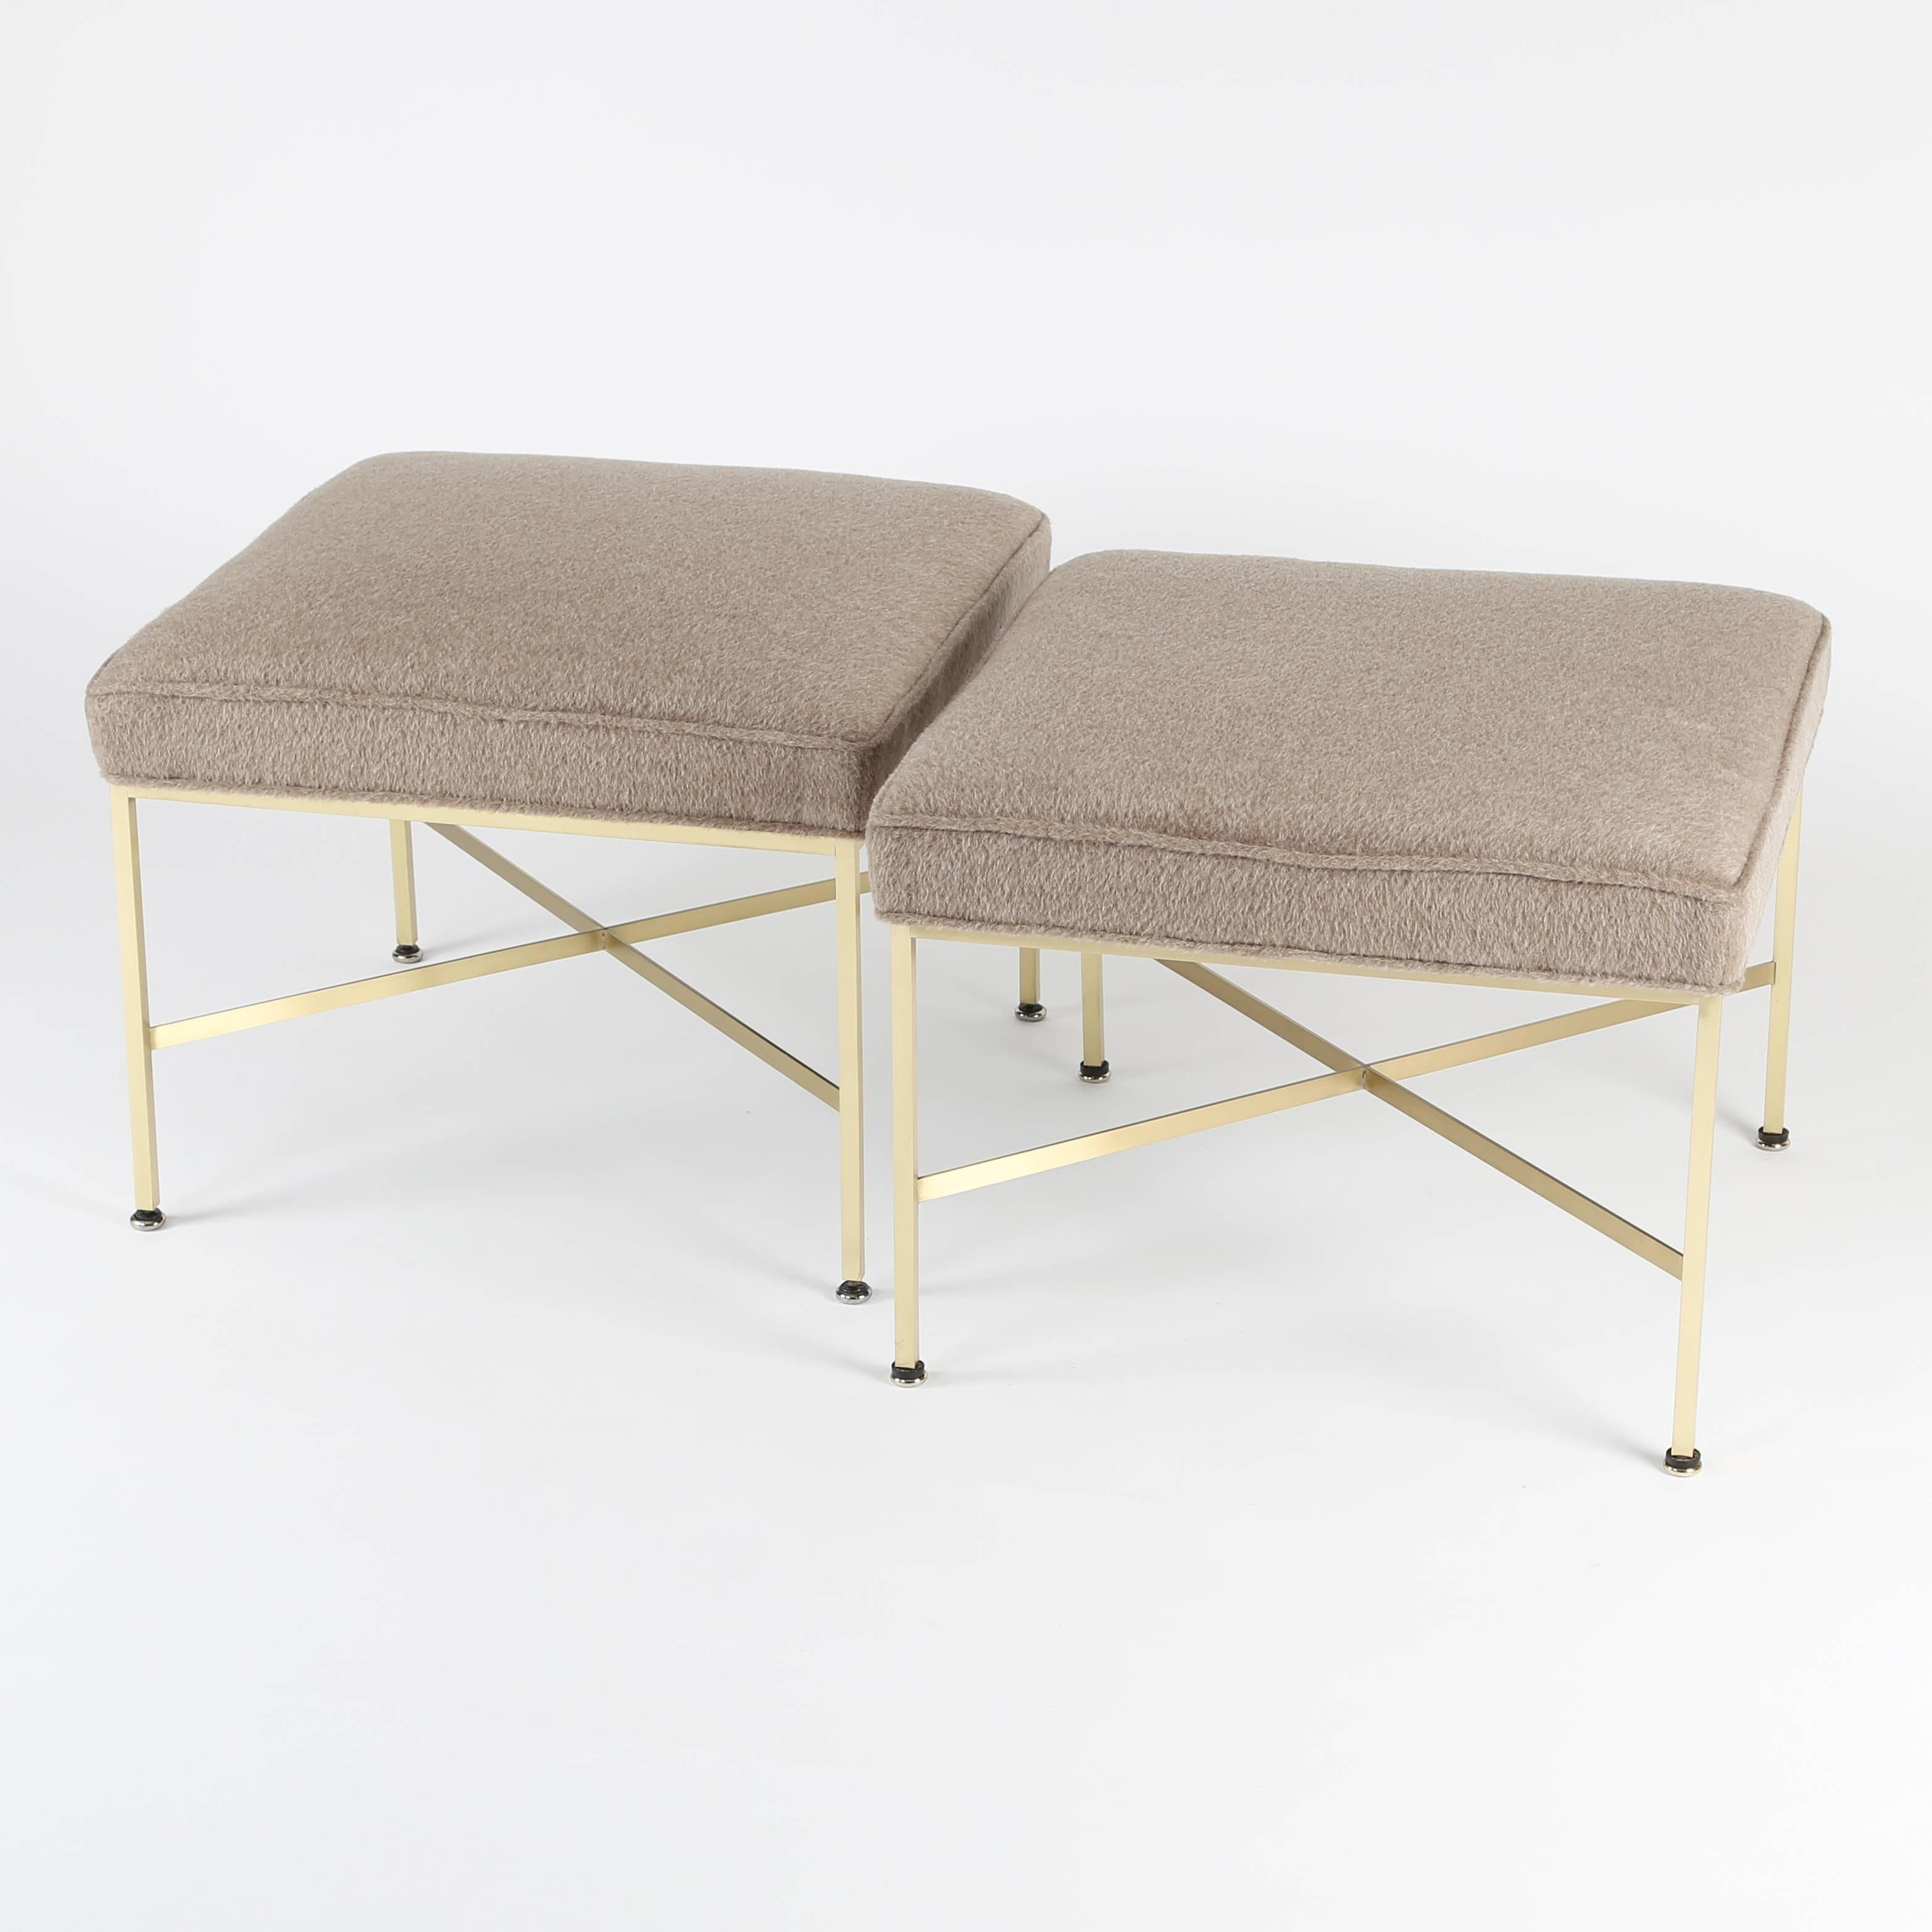 American Pair of 1950s Paul McCobb X-Base Brass Stools with Luxe Upholstery